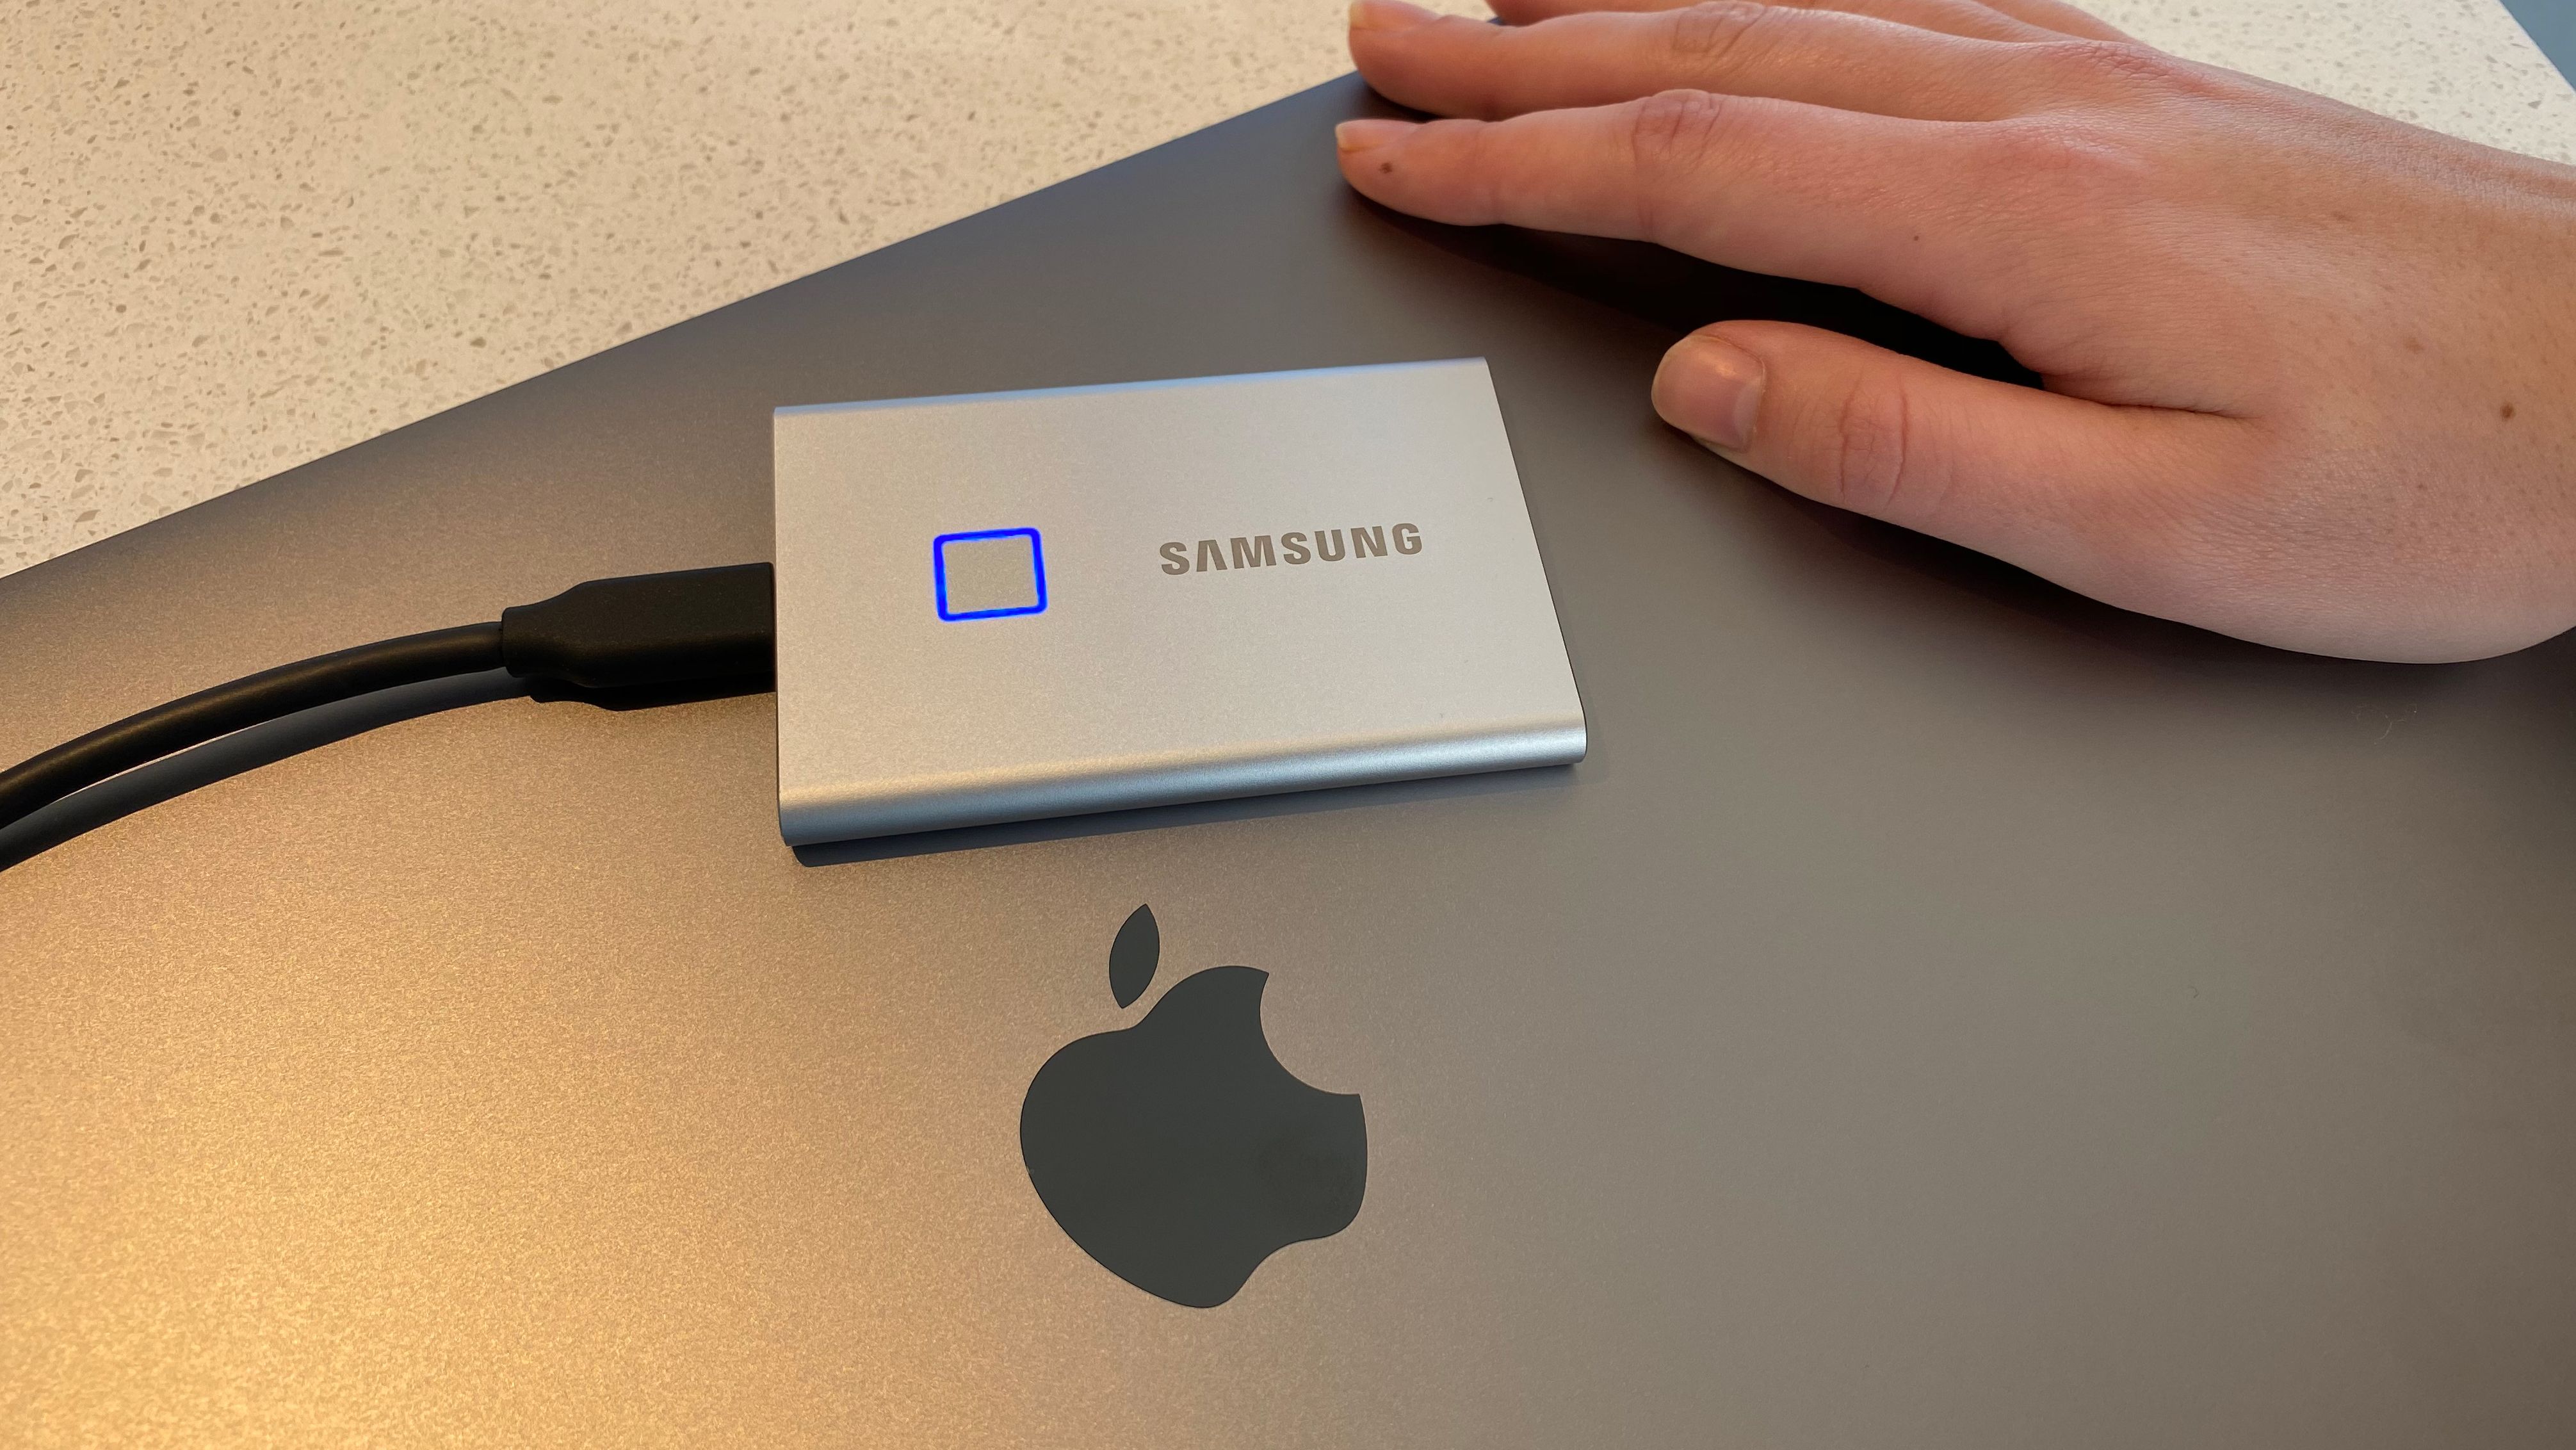 Samsung T7 Touch Portable SSD